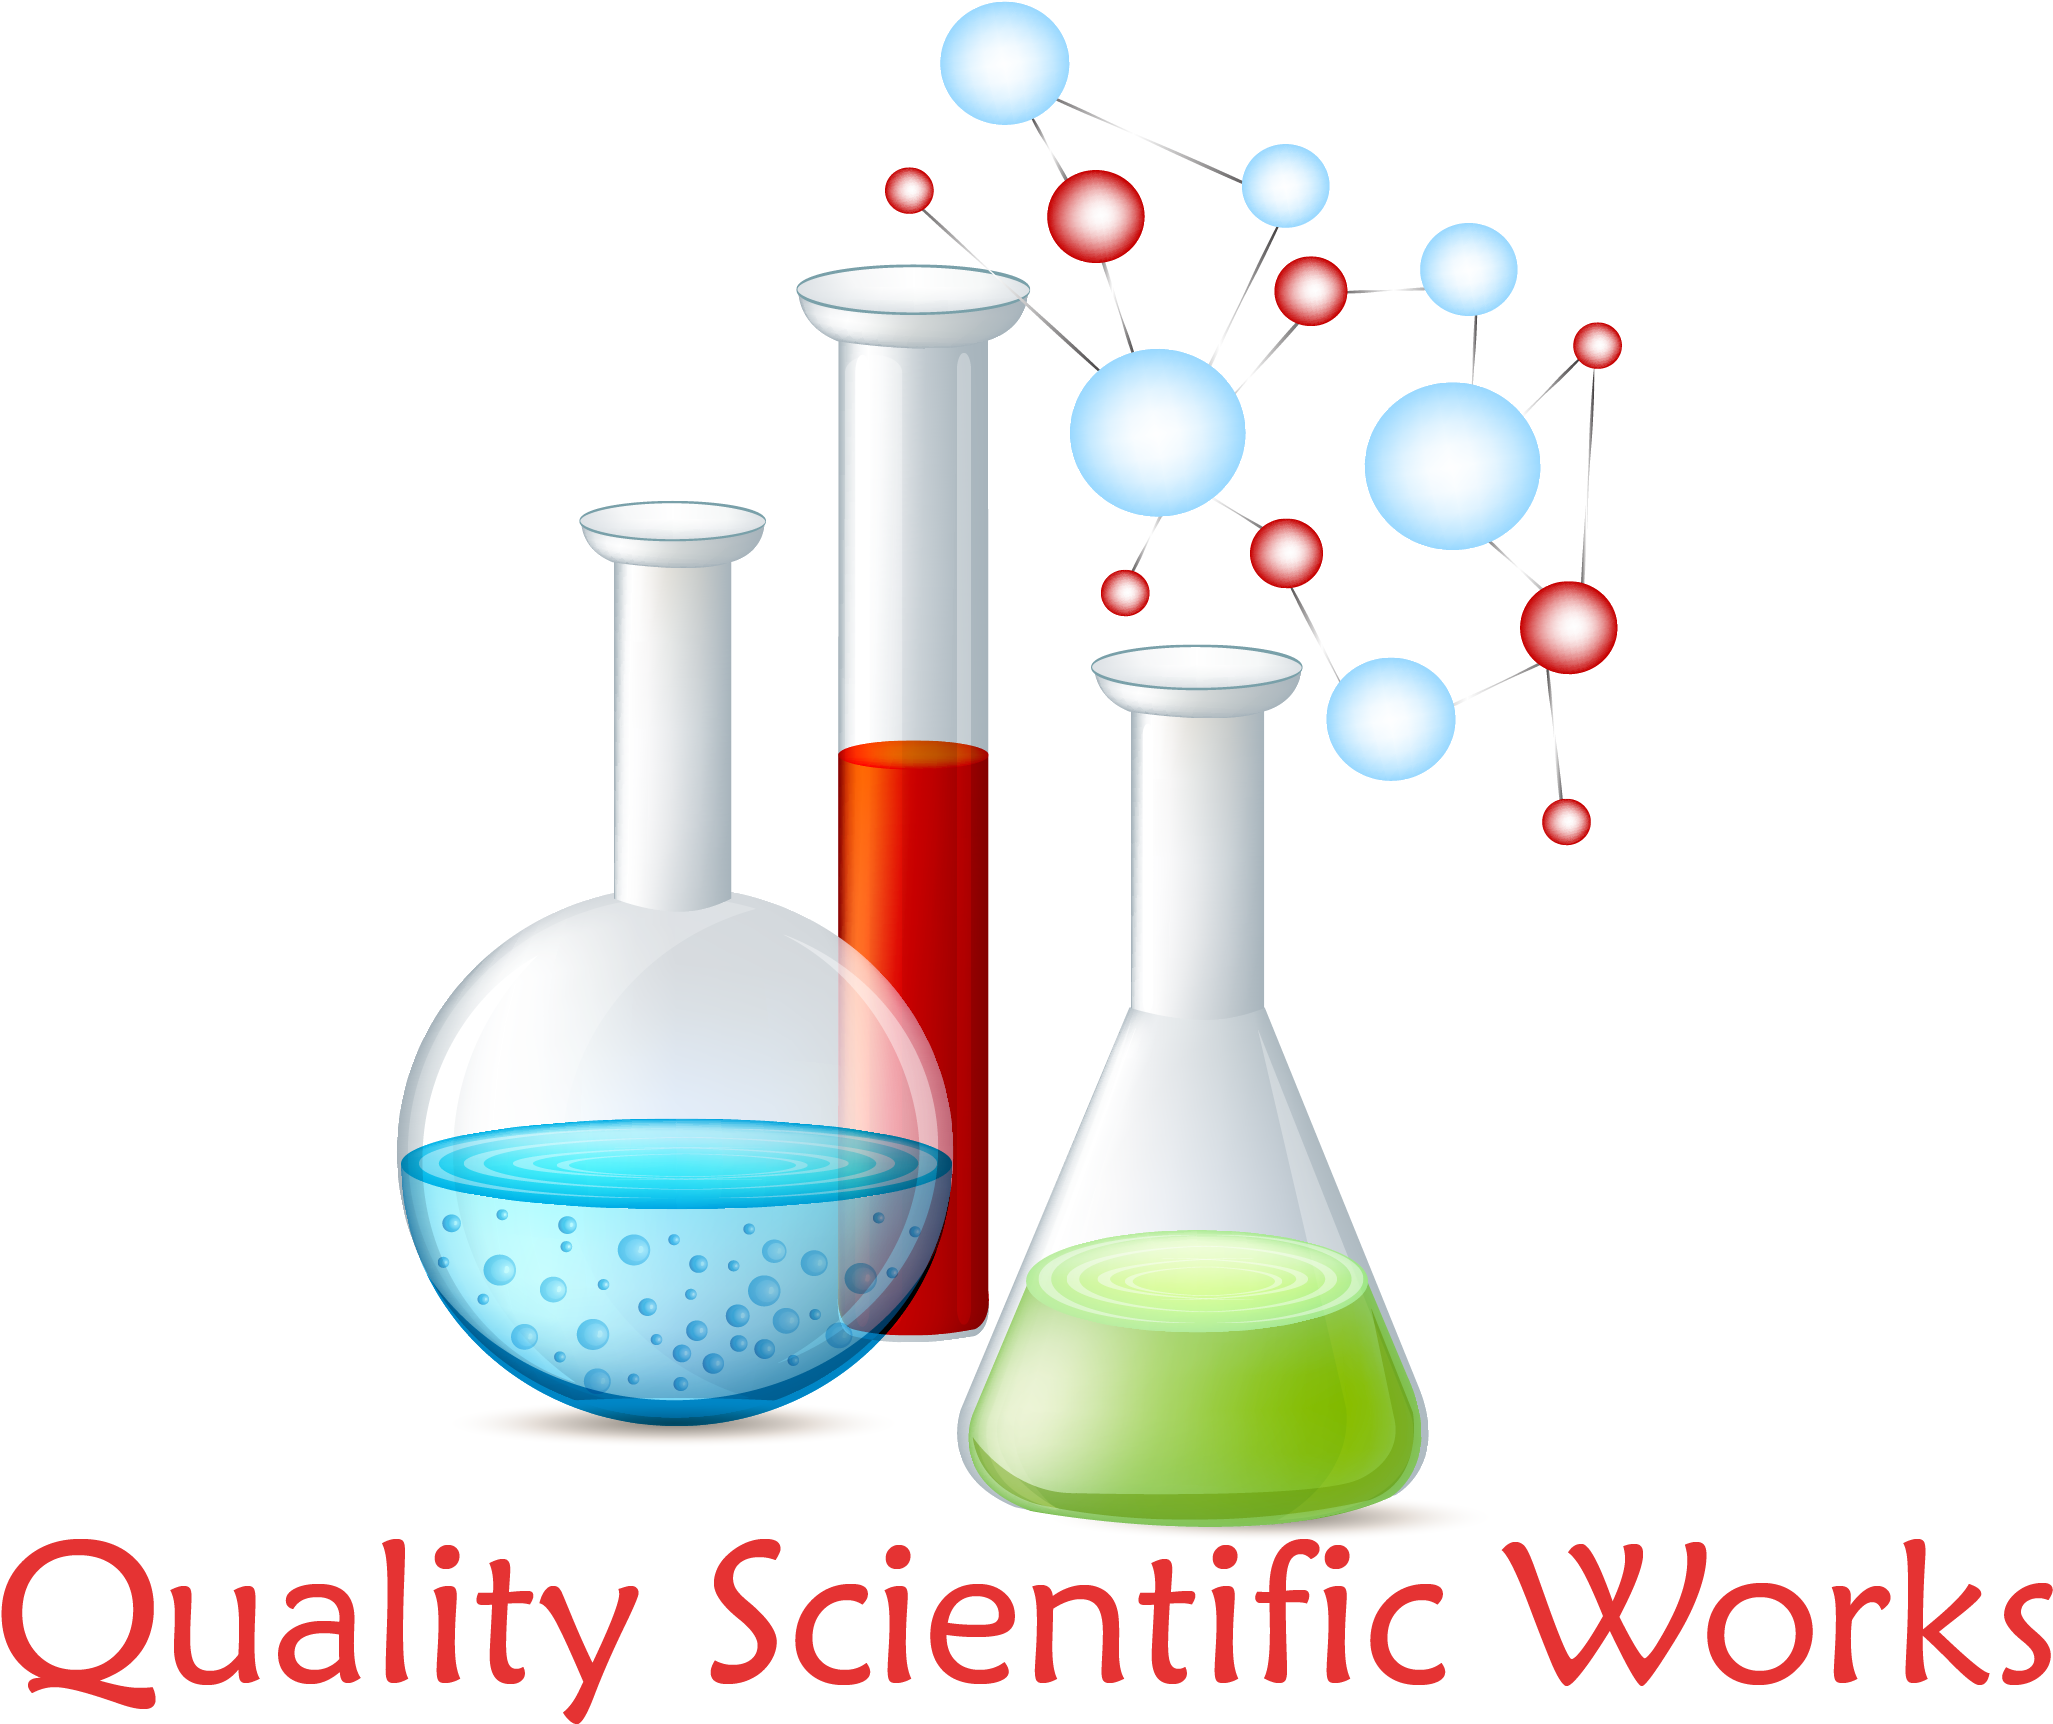 Quality Scientific Works An Aim To Provide Superior - Chemistry Introduction (2667x1841)